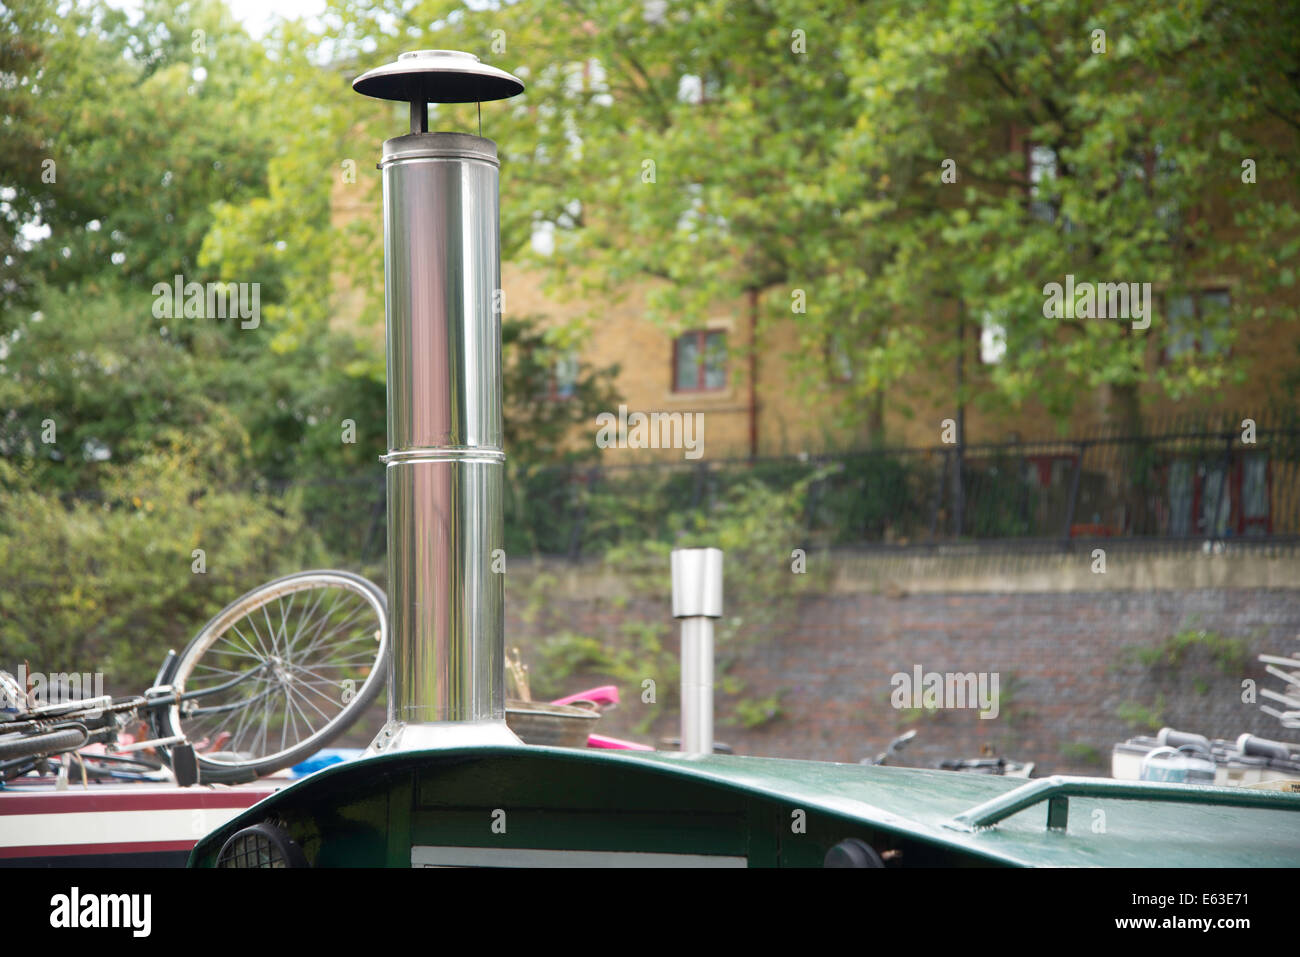 2014, Close up of chrome chimney with pink reflection on a canal boat on Regents Canal, London Stock Photo